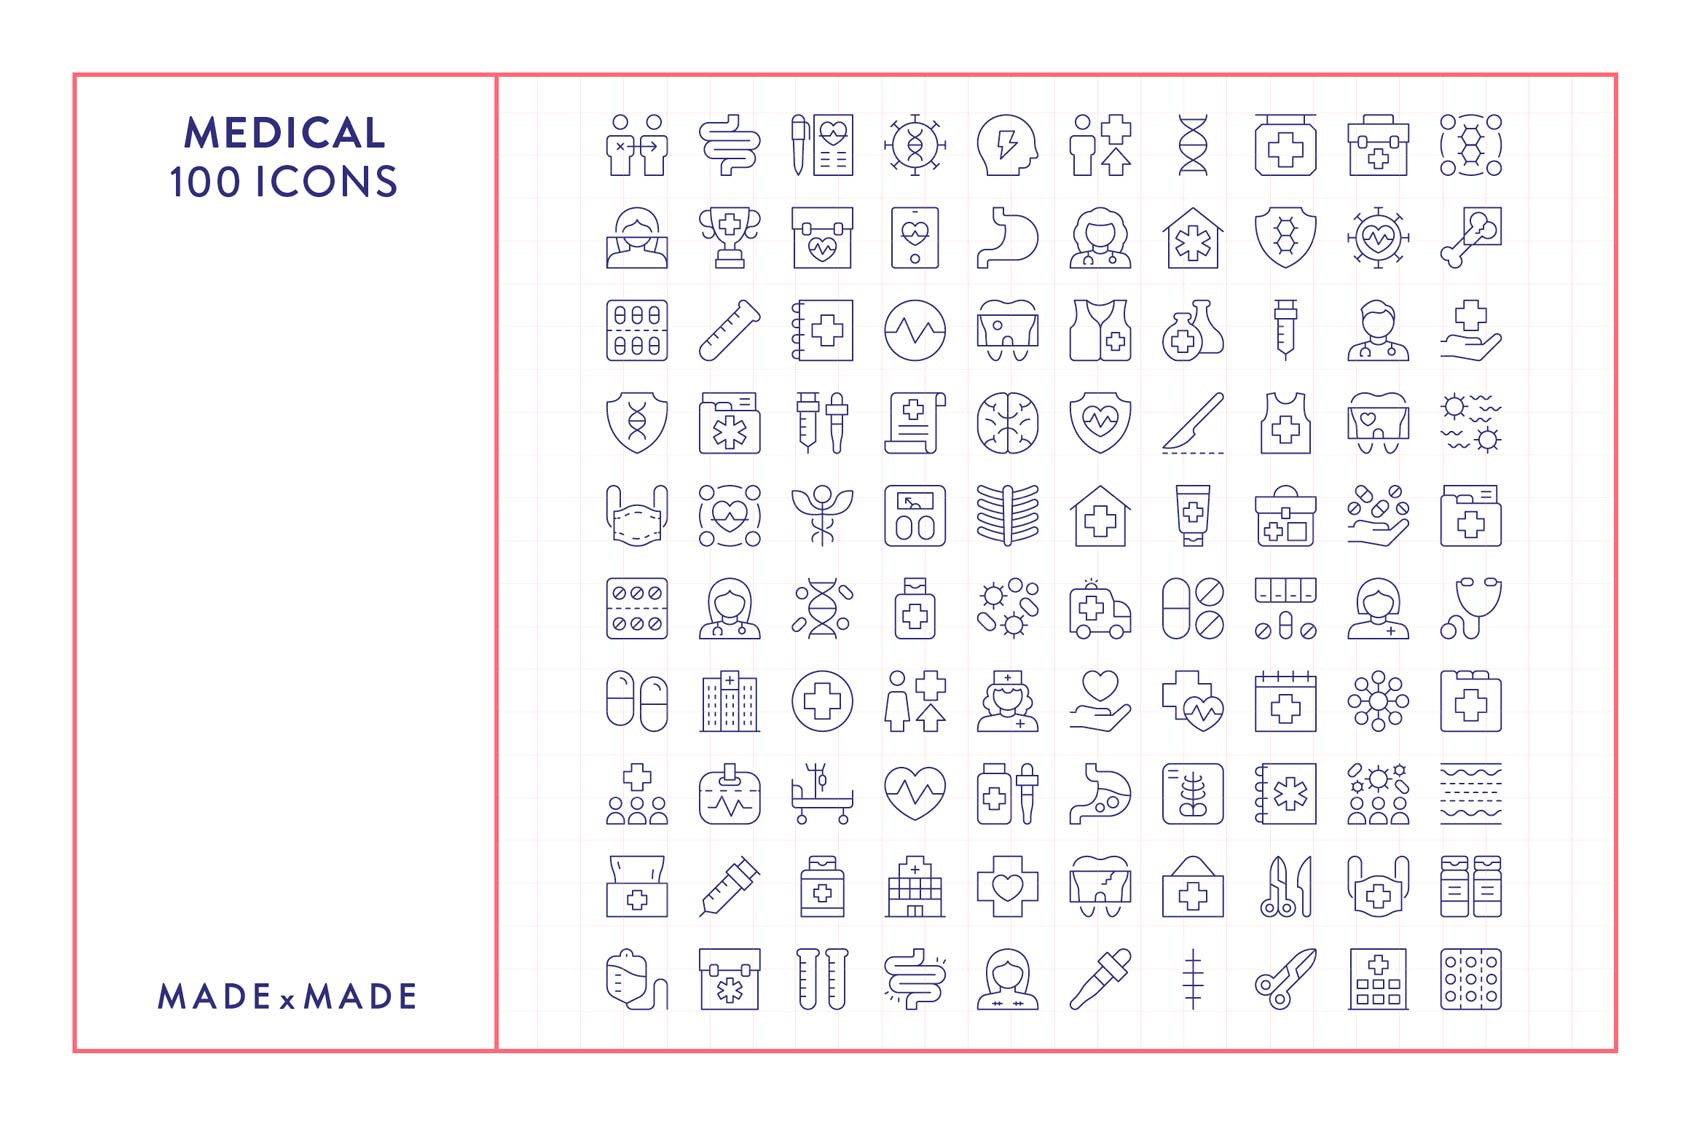 made x made icons medical cover – consistent icons for healthcare, medication, hospitals, doctors, emergency services, med-science, pandemics - 100 icon samples